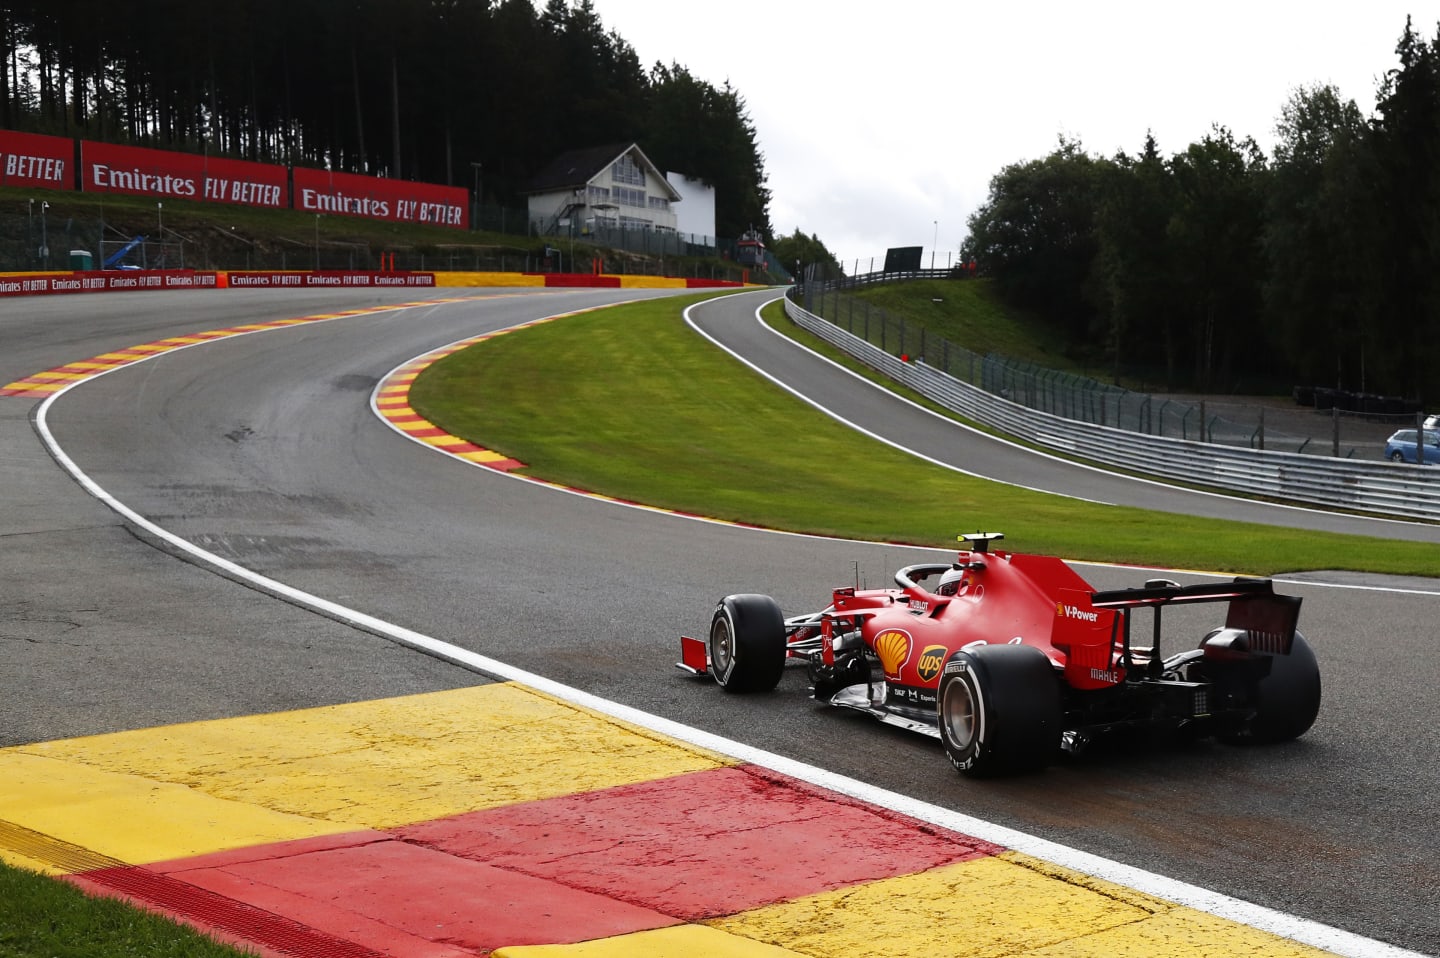 SPA, BELGIUM - AUGUST 28: Charles Leclerc of Monaco driving the (16) Scuderia Ferrari SF1000 on track during practice for the F1 Grand Prix of Belgium at Circuit de Spa-Francorchamps on August 28, 2020 in Spa, Belgium. (Photo by Francois Lenoir/Pool via Getty Images)